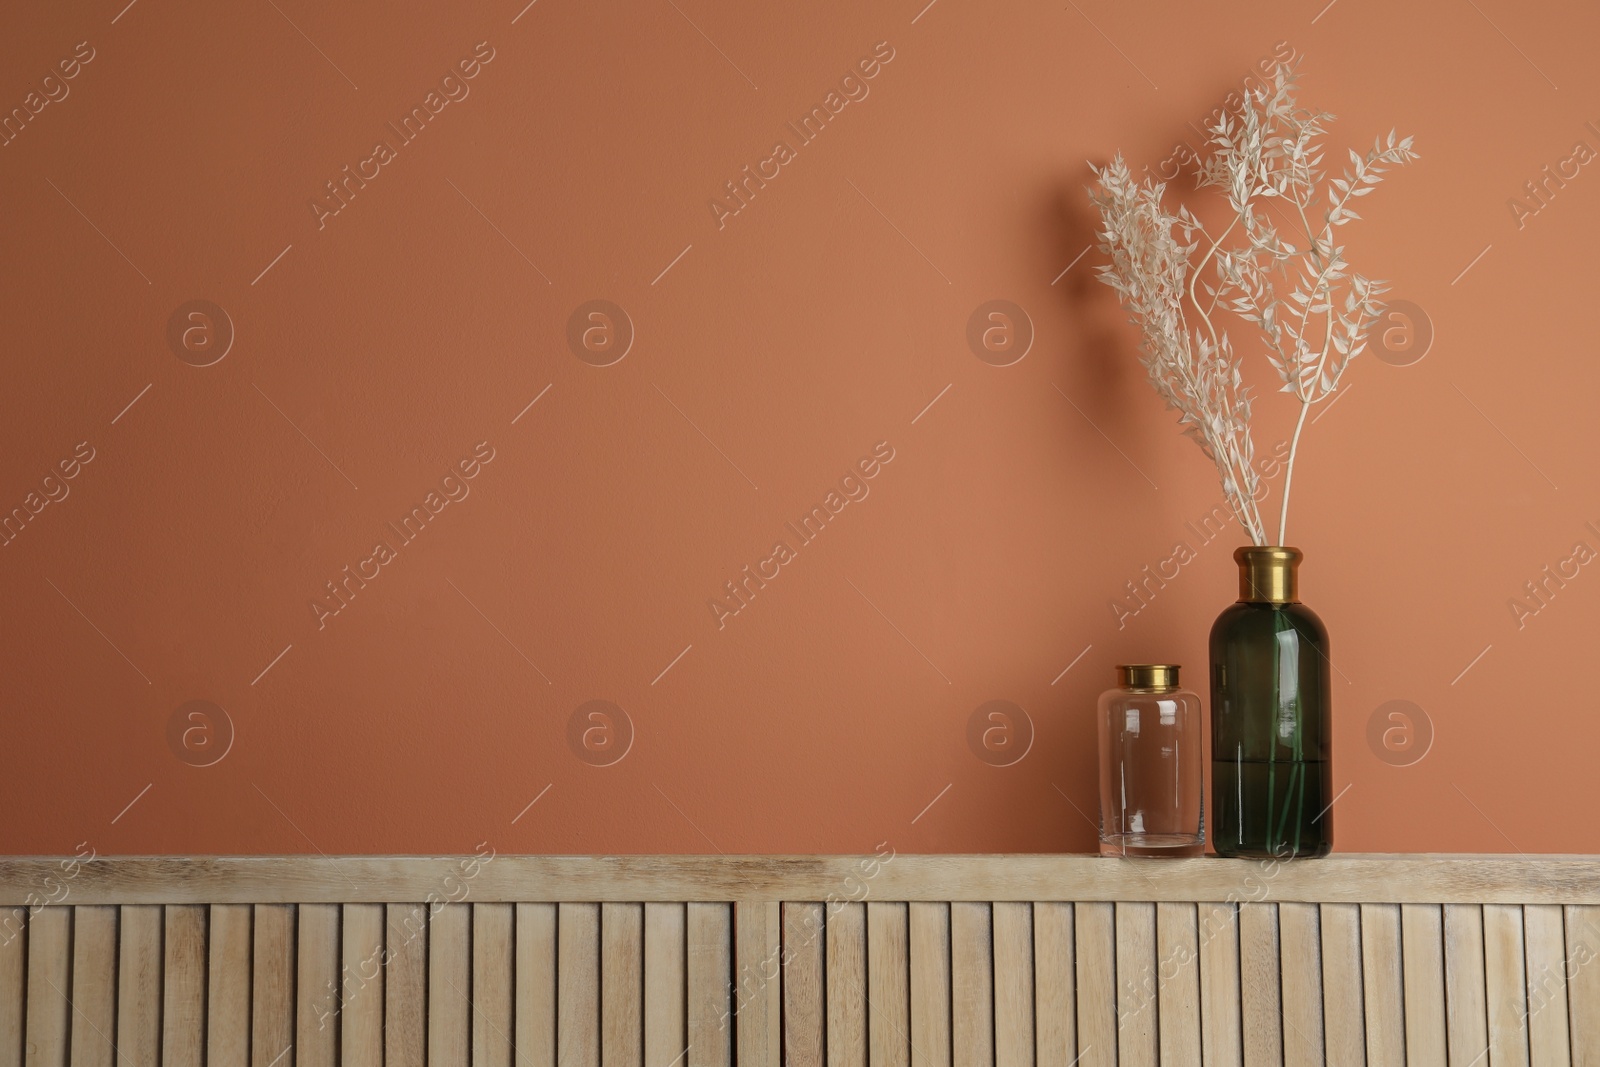 Photo of Decorative vases on wooden shelf near wall indoors